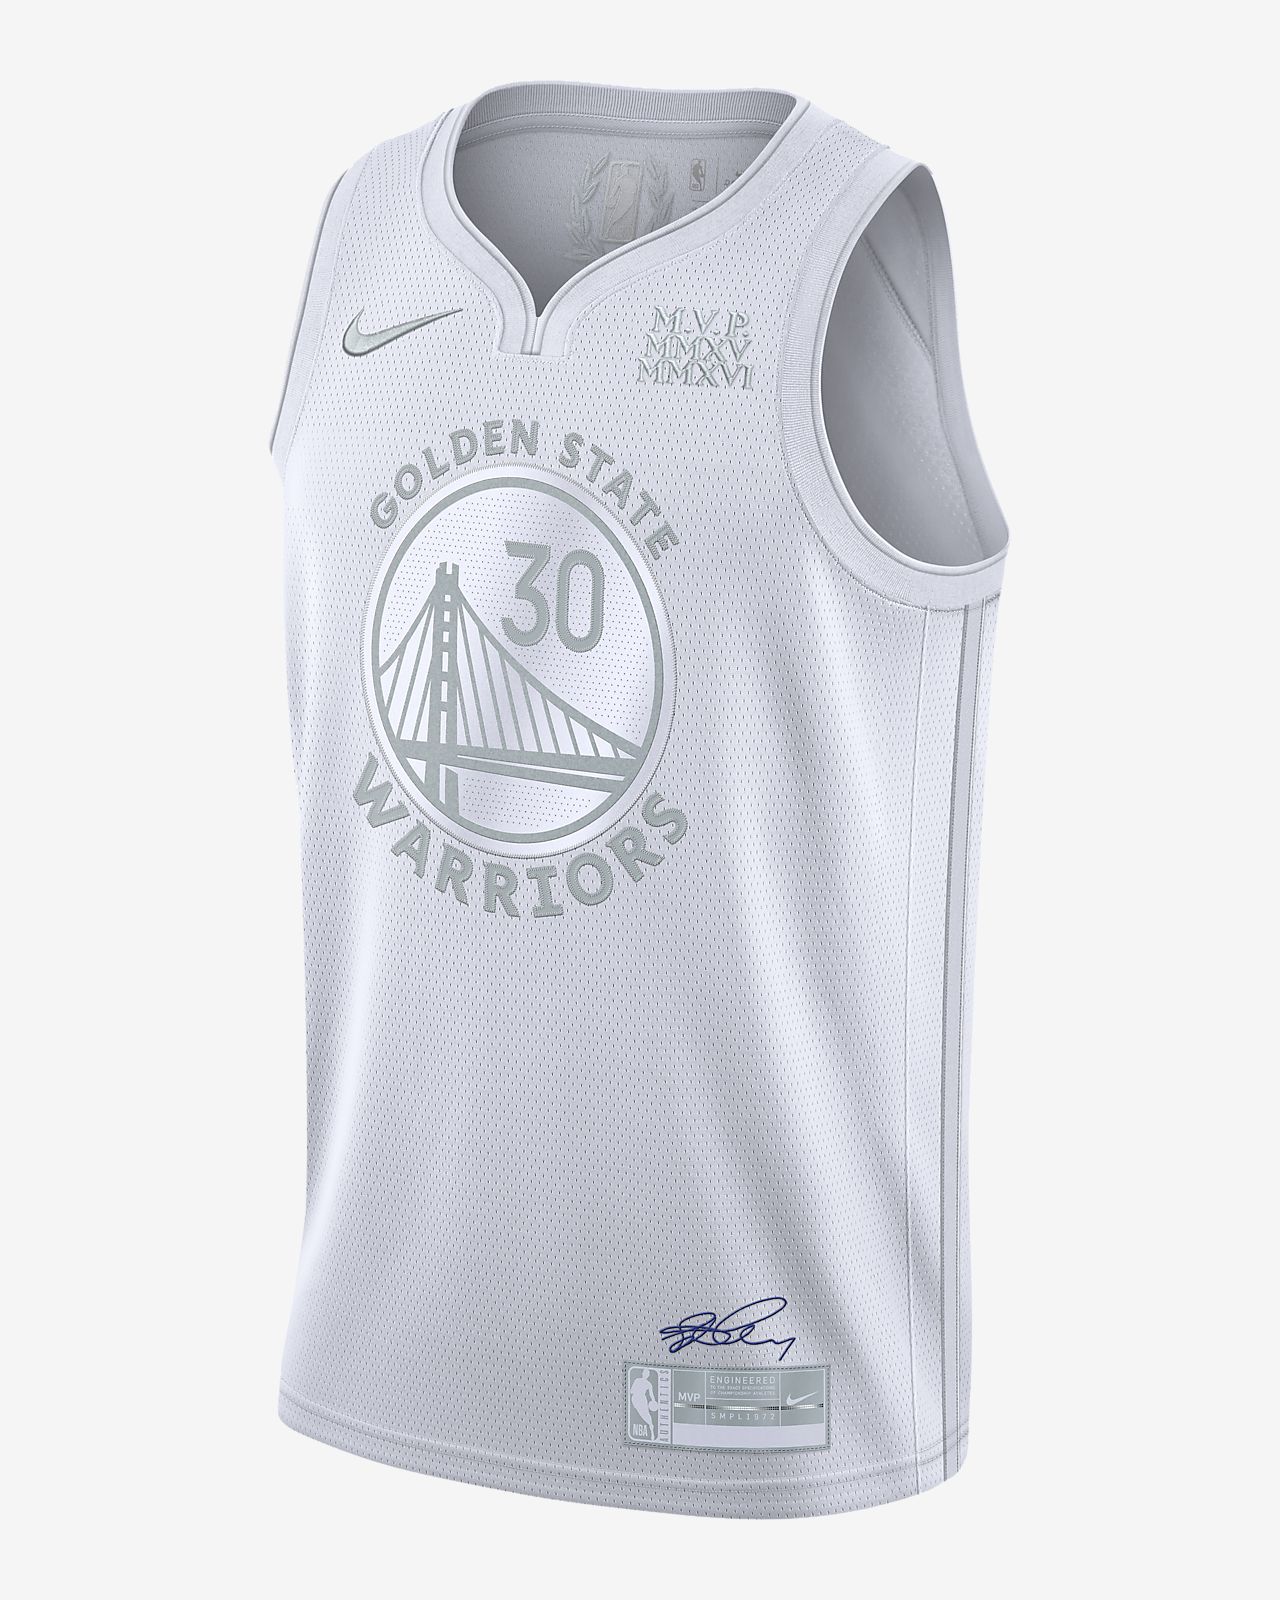 nba store stephen curry jersey